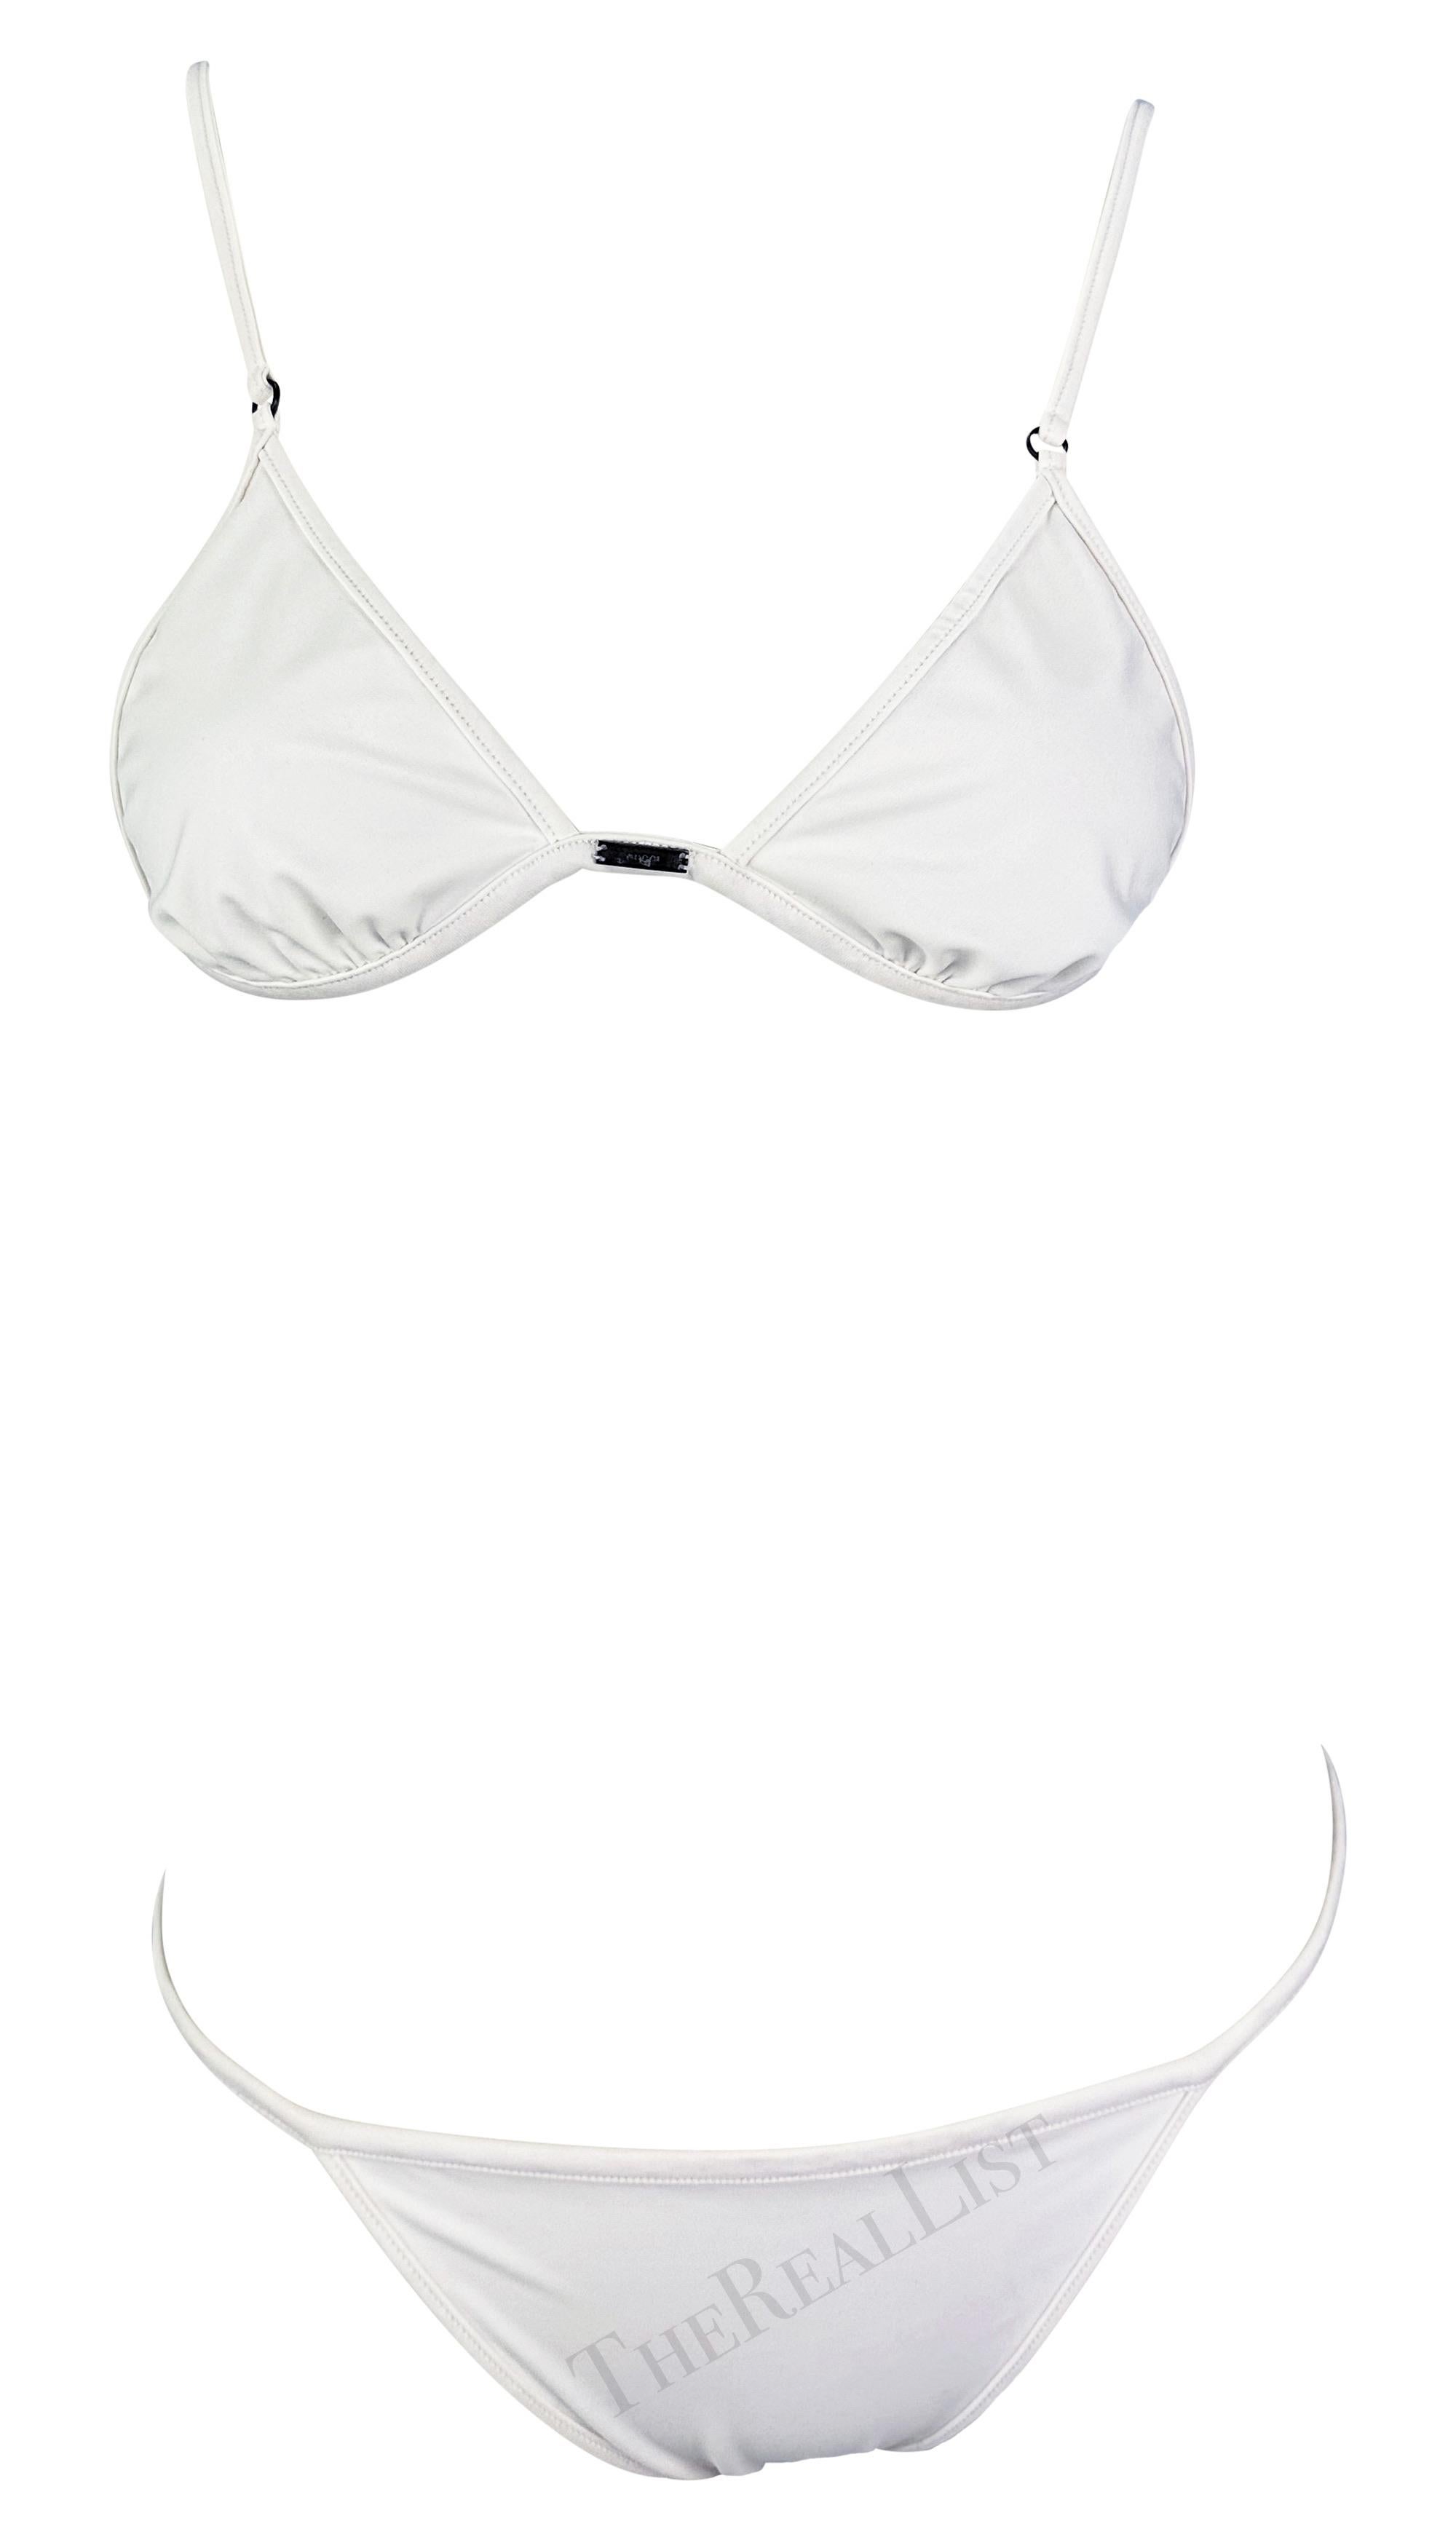 Presenting a chic white Gucci bikini, designed by Tom Ford. From the Spring/Summer 2001 collection, this white two-piece bathing suit is comprised of a triangle-style top and thin stringed bottoms. The top features a small black 'Gucci' branded